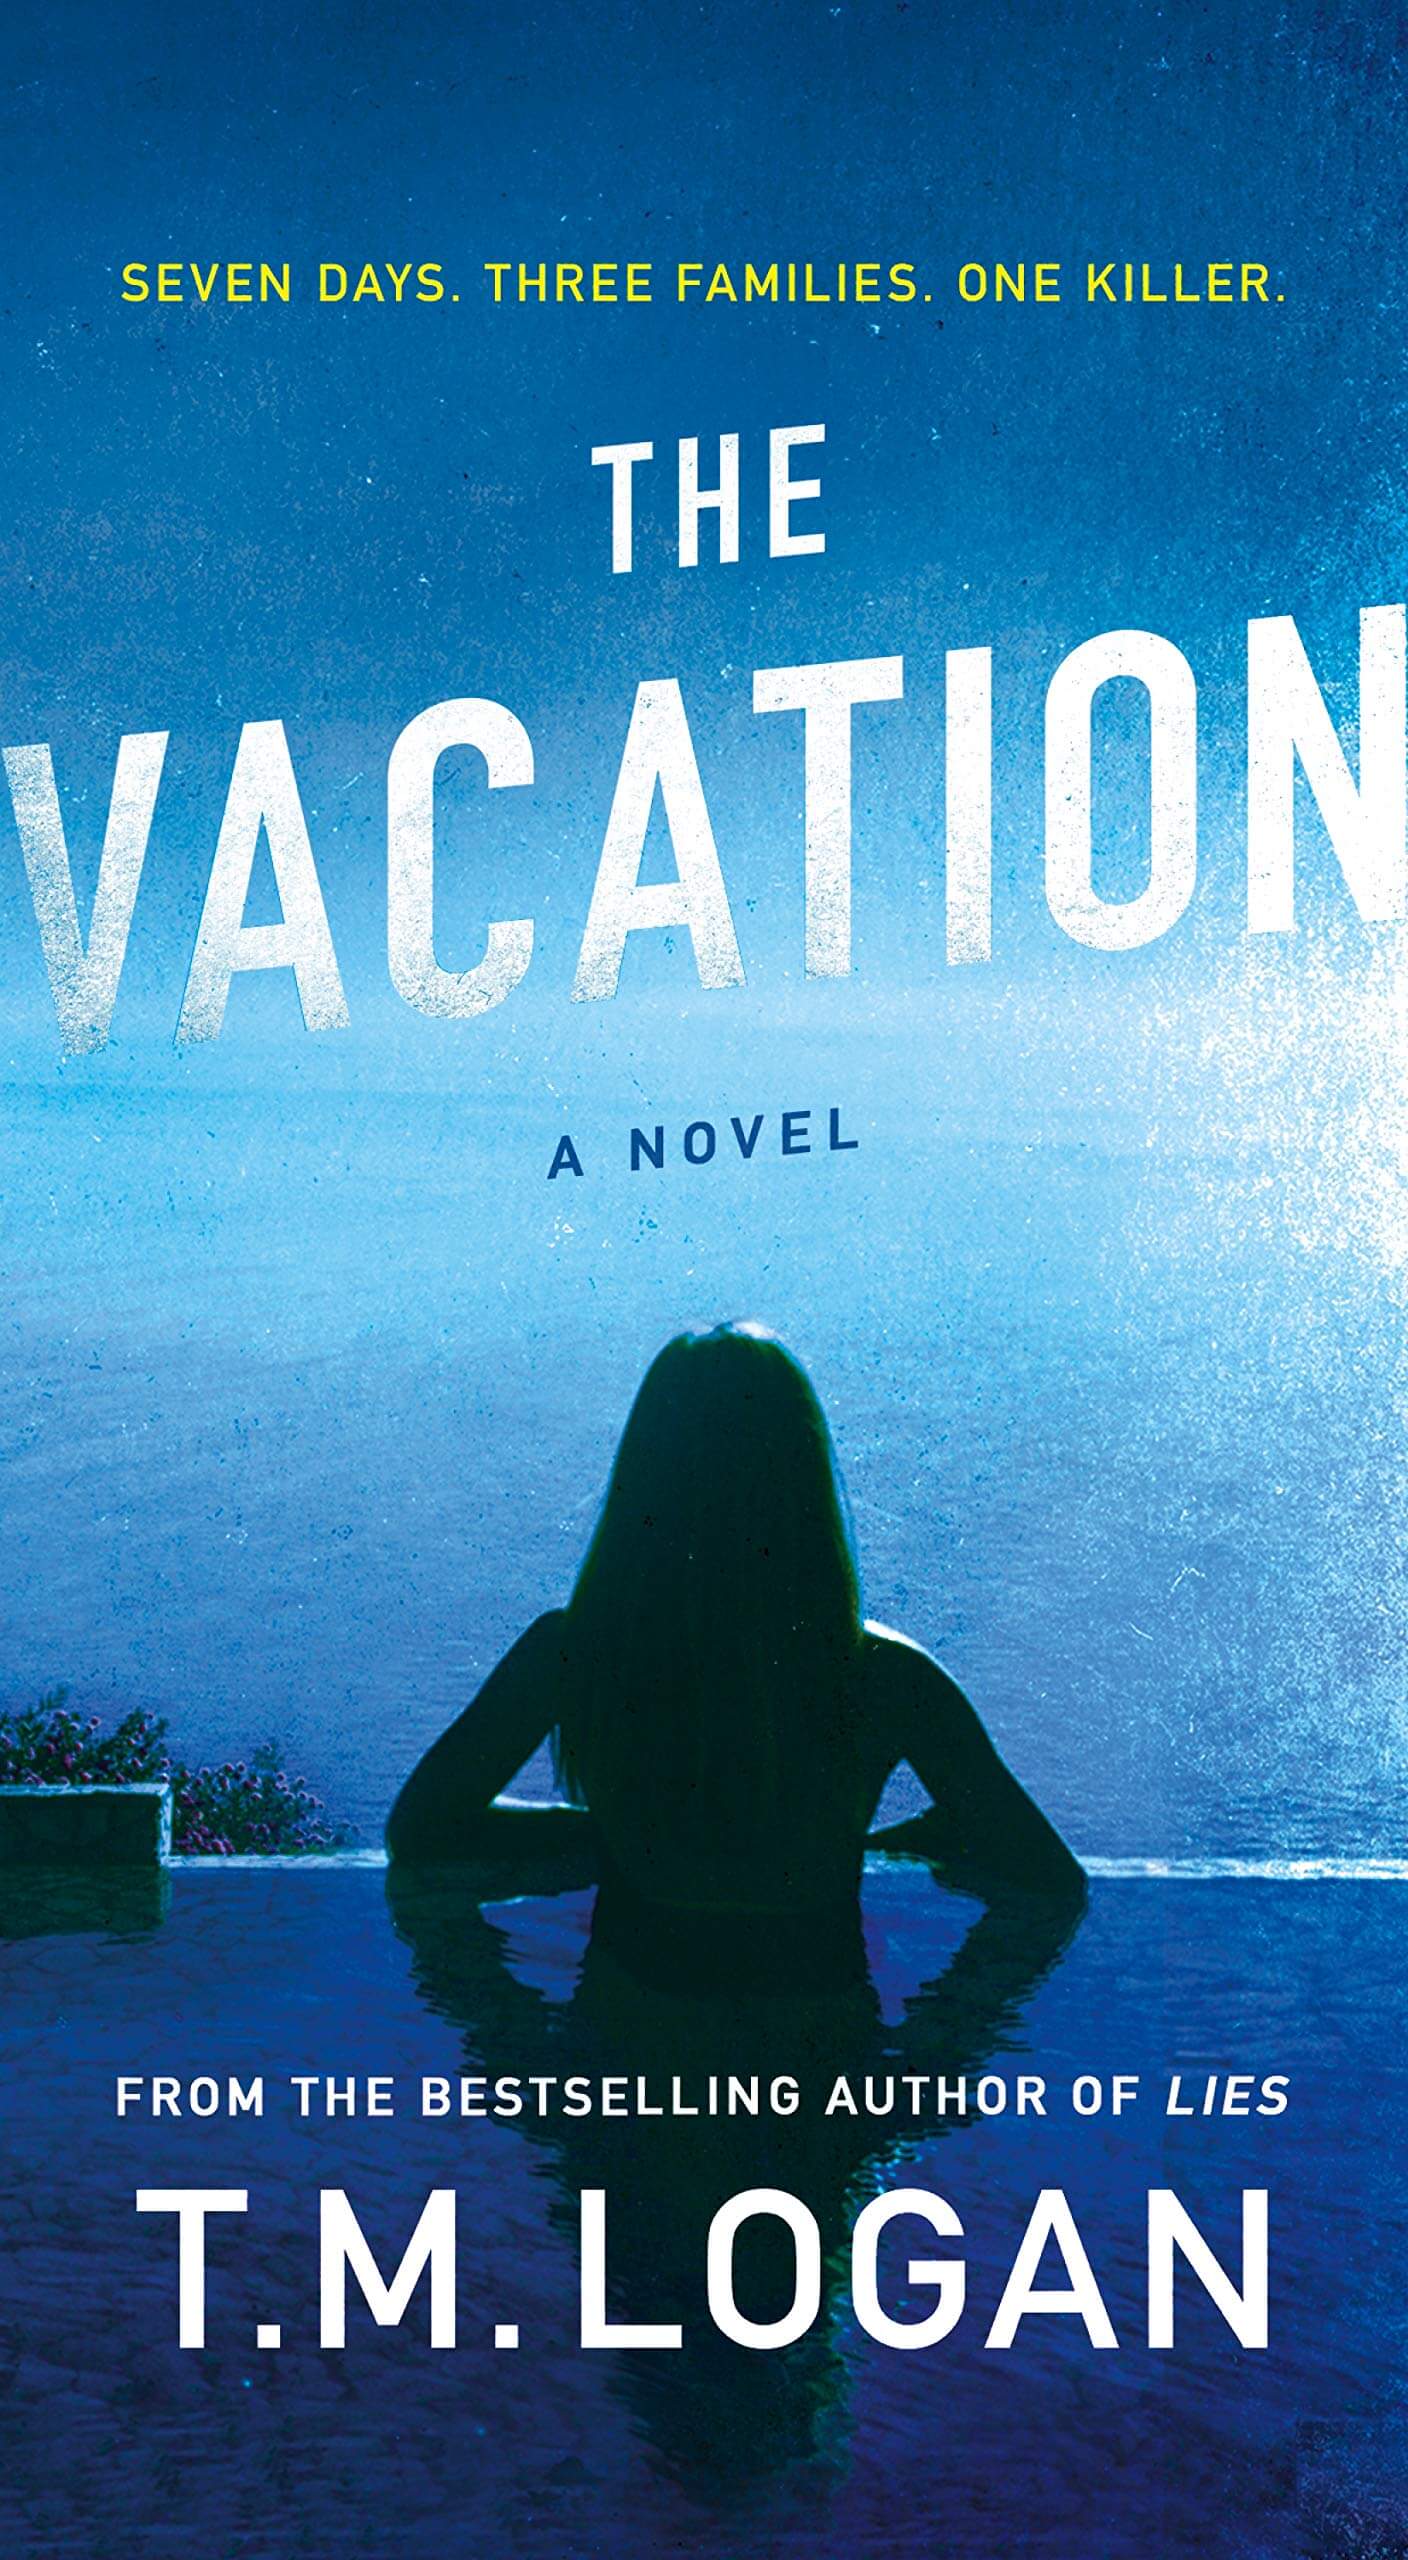 Cover of The Vacation by T.M. Logan 